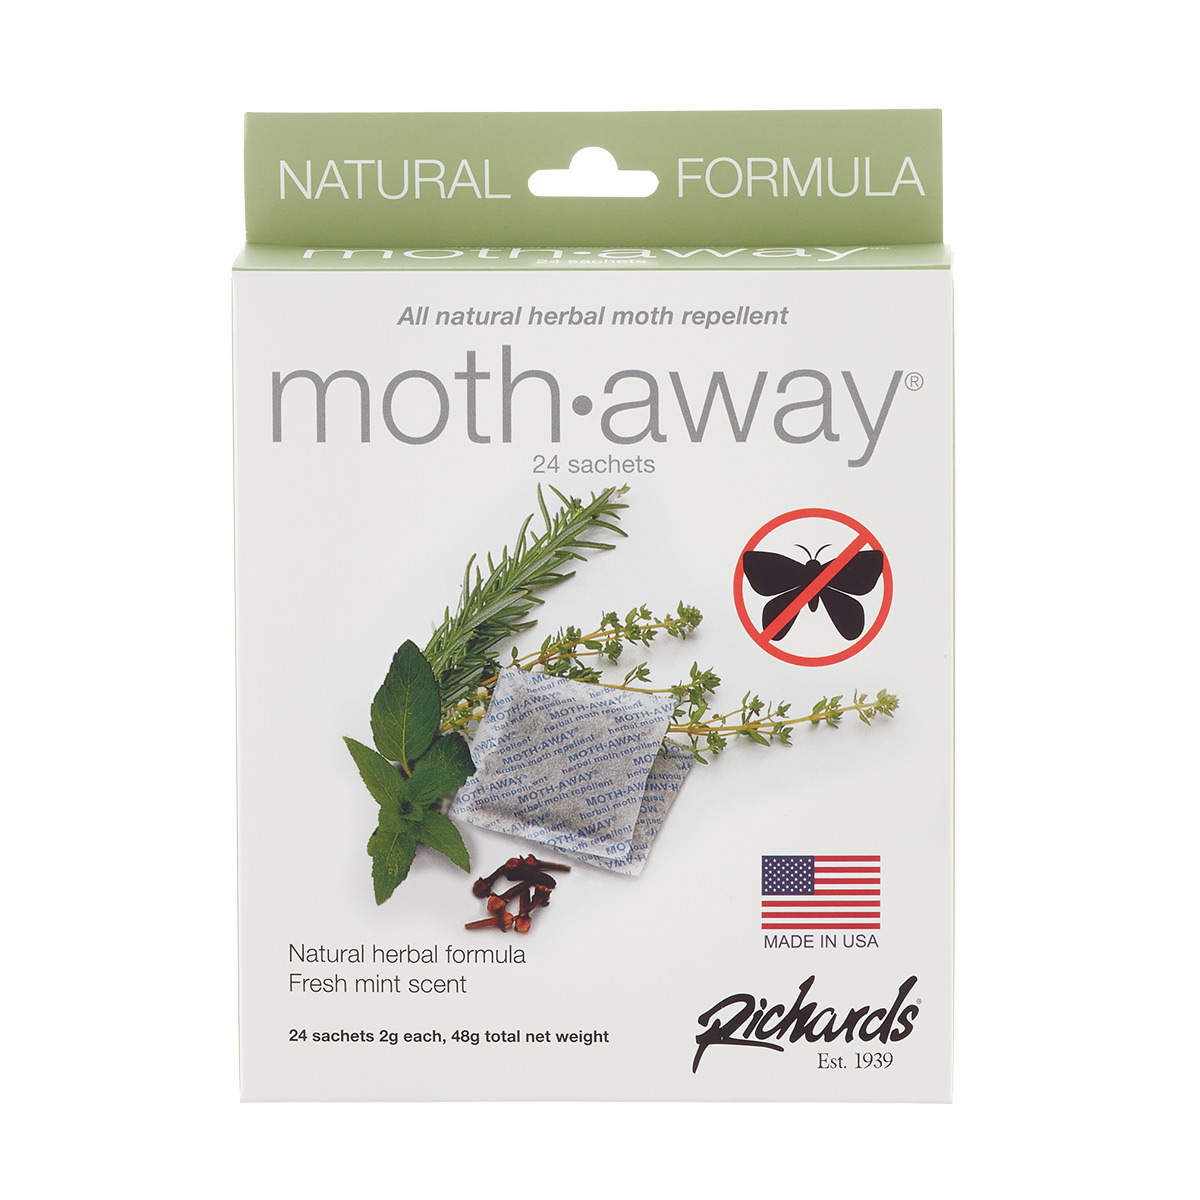 https://www.containerstore.com/catalogimages/499059/10095150-moth-away-repellent-sachets.jpg